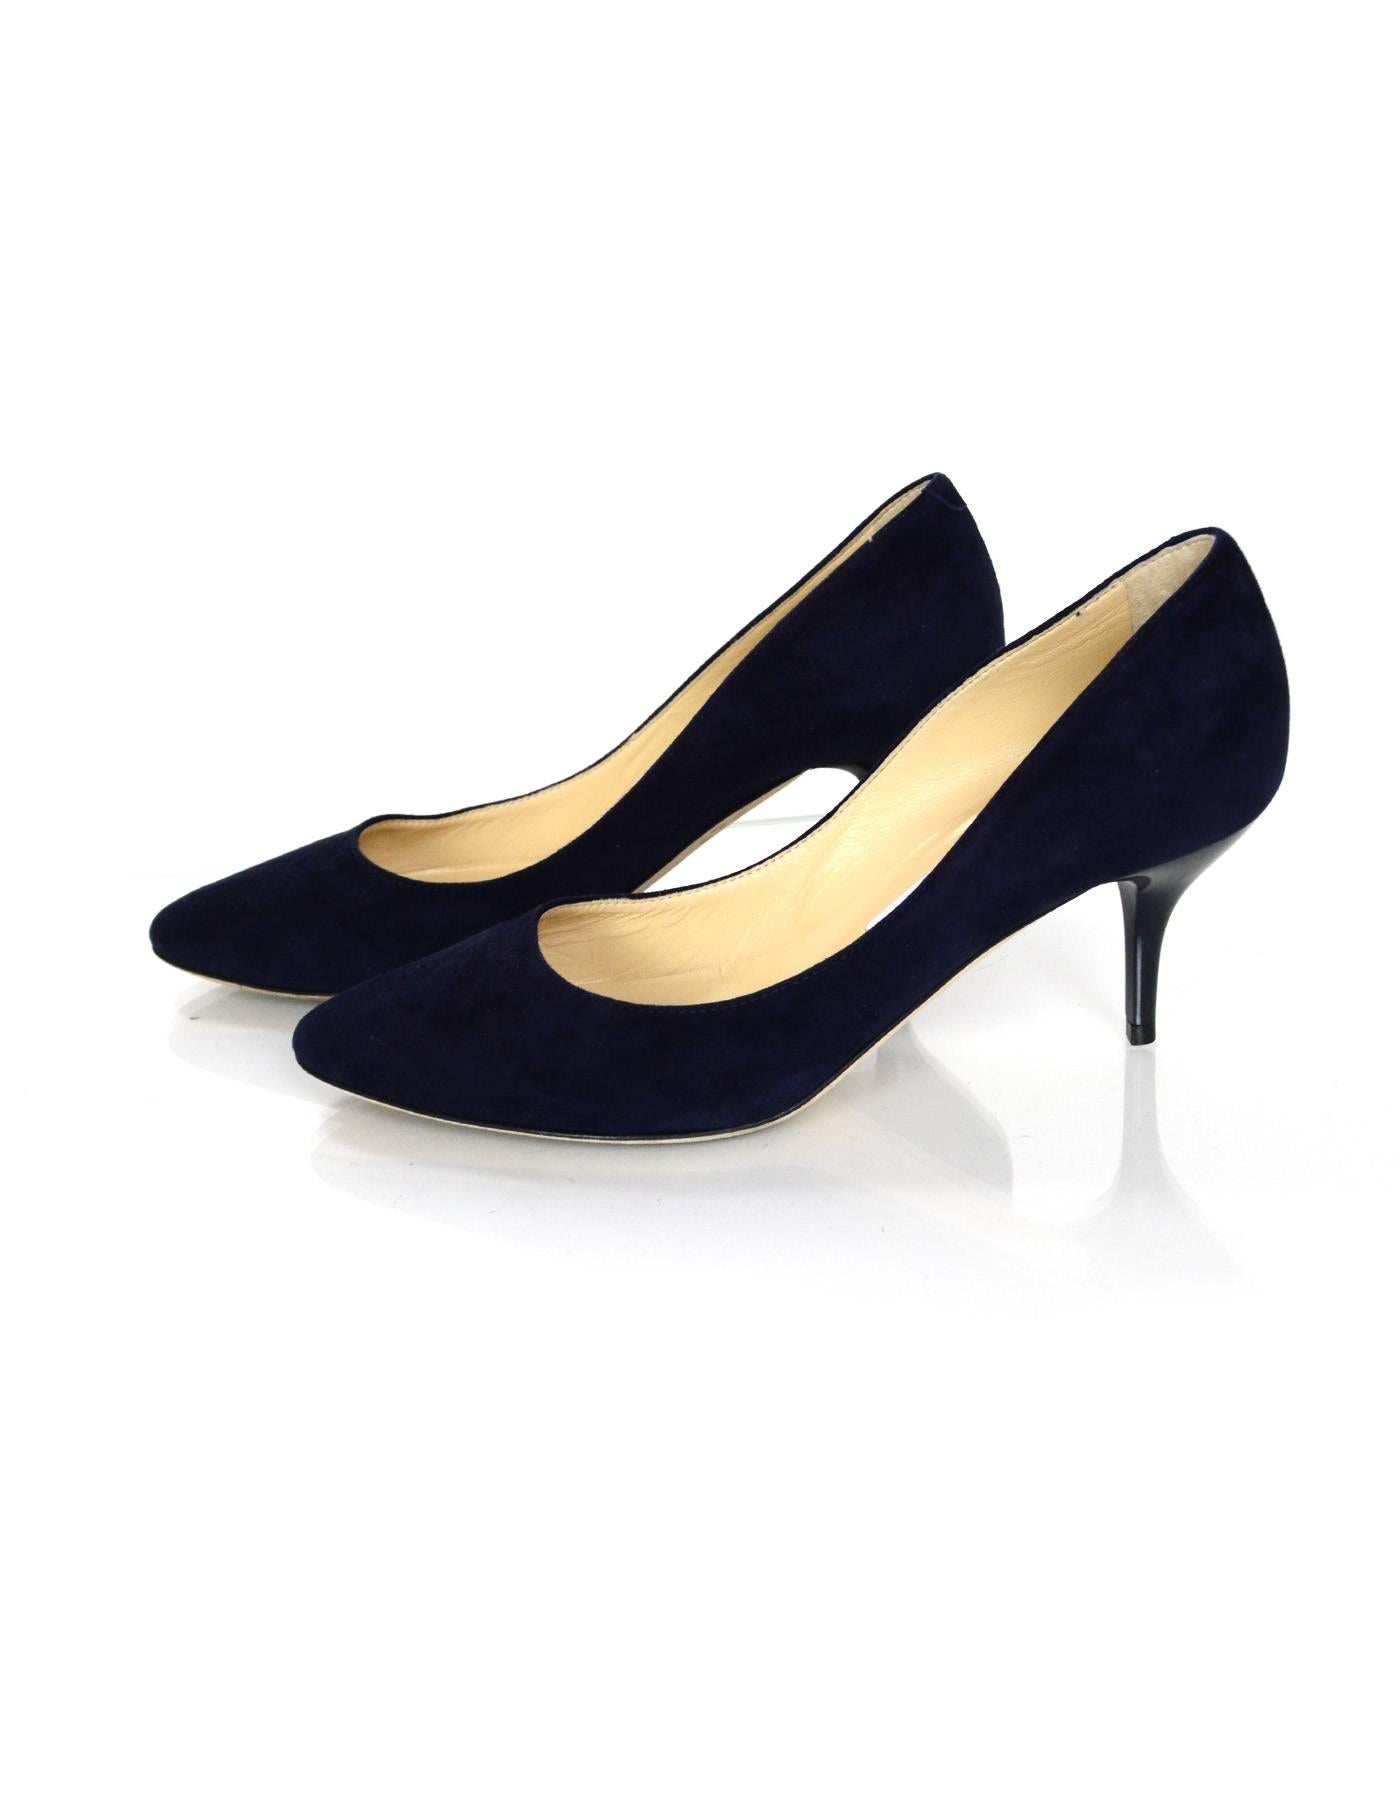 Jimmy Choo Navy Suede Pumps
Features navy shiny enamel heel

Made In: Italy
Color: Navy
Materials: Suede and enamel
Closure/Opening: Slip on
Sole Stamp: Jimmy Choo London Made in Italy 36
Overall Condition: Excellent pre-owned condition with the